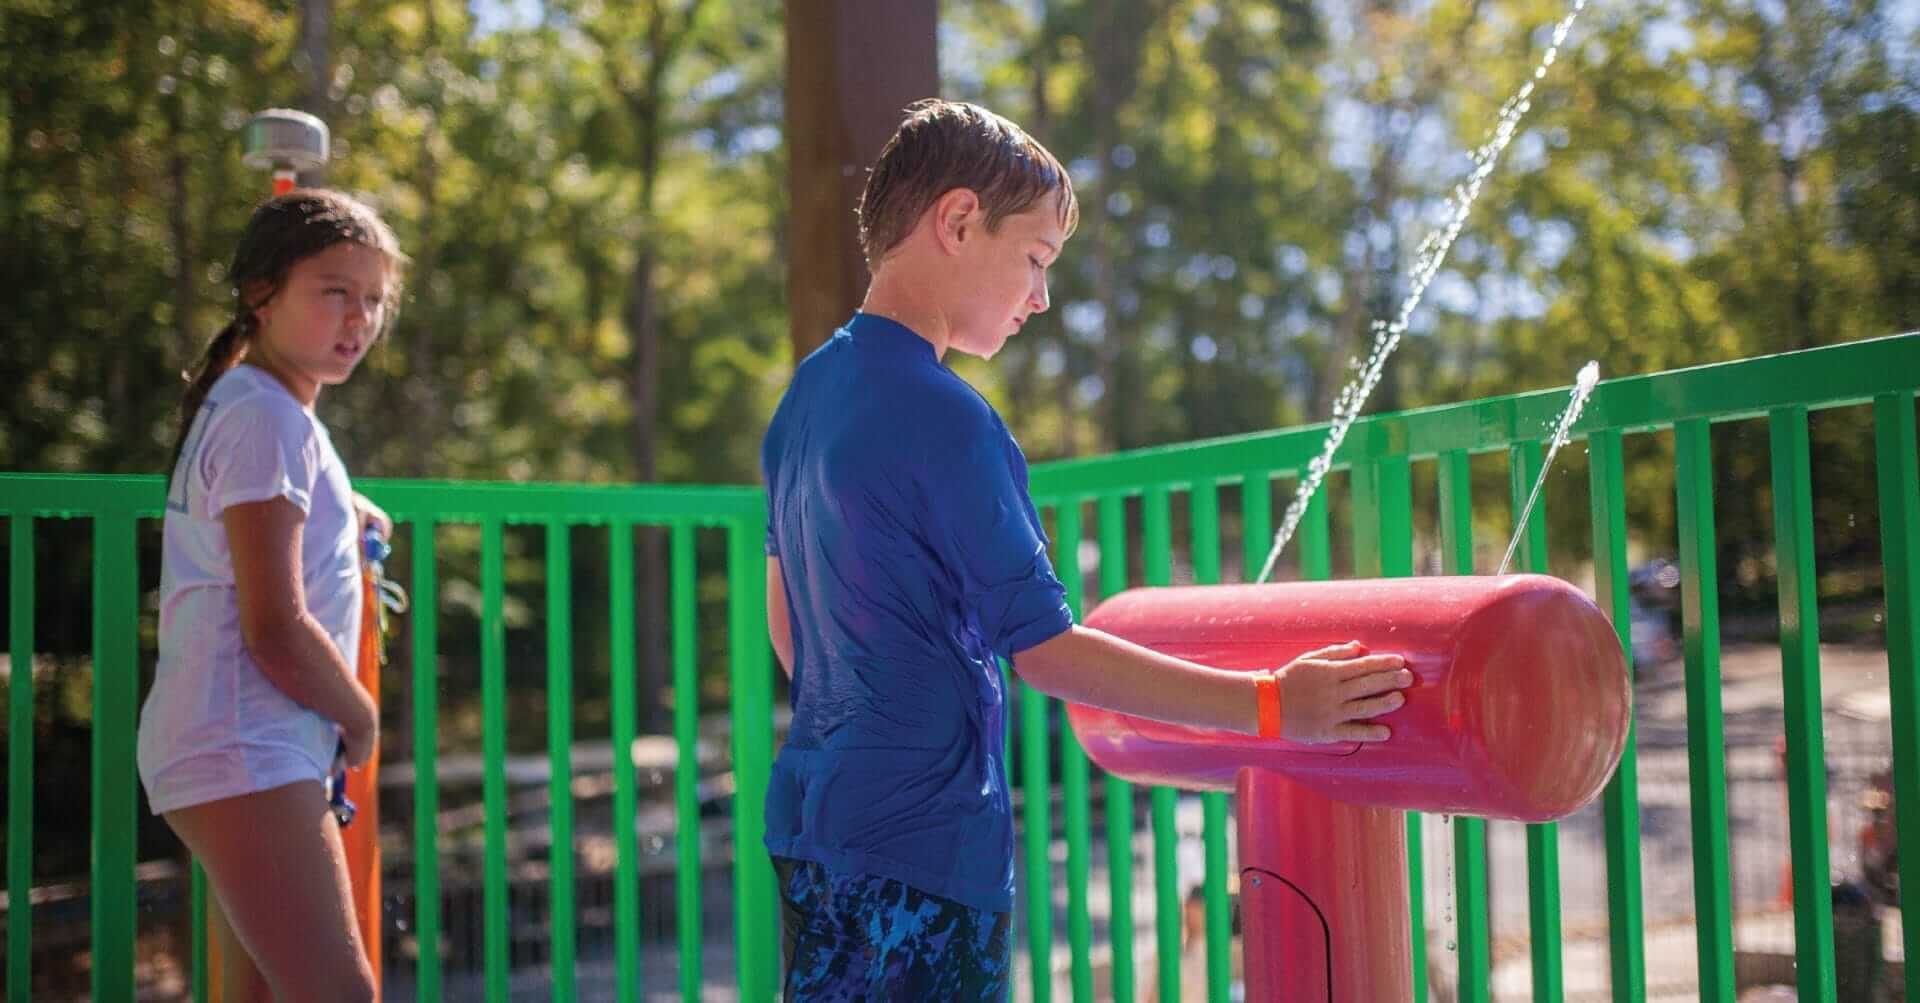 A young boy activates the Thump Pump water play feature by waiving his hand over the proximity sensor.